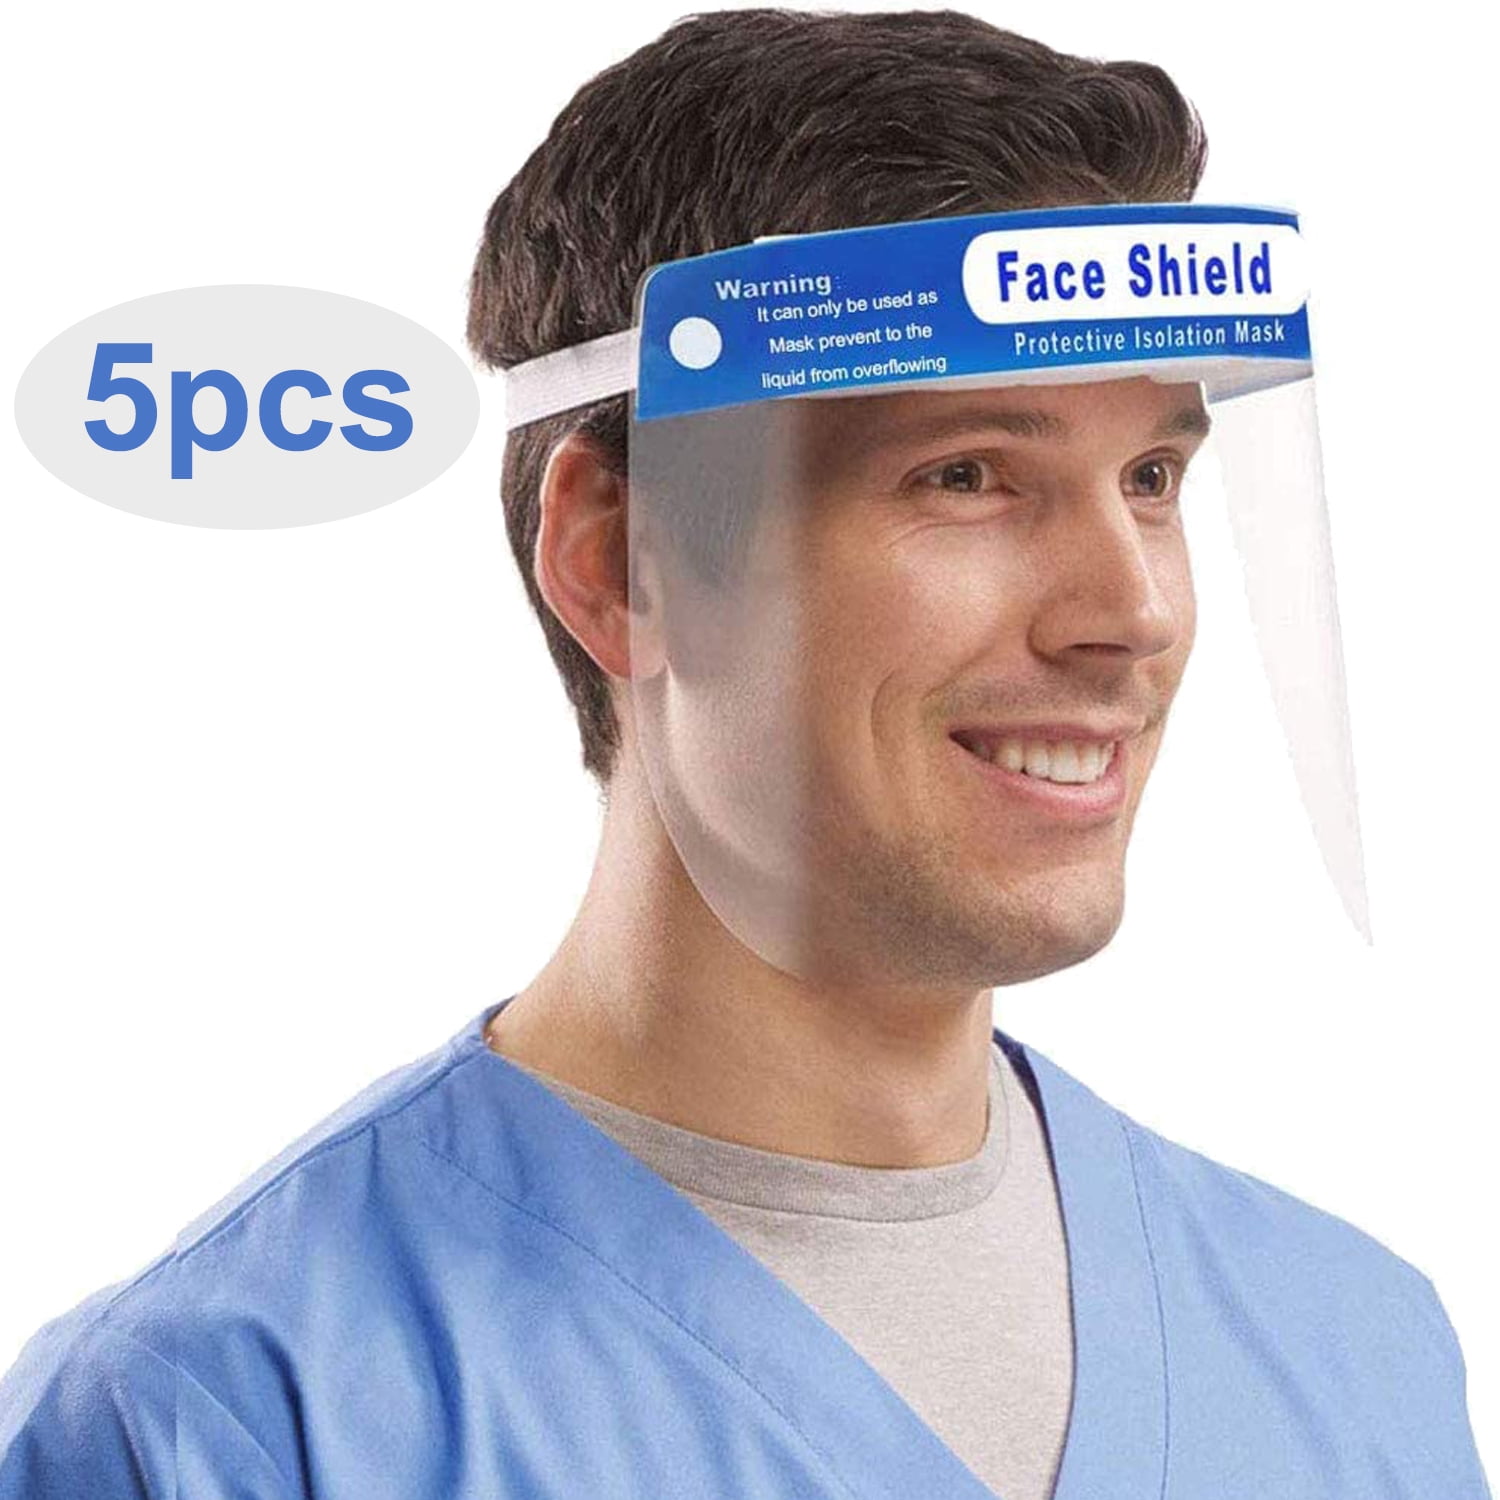 10 Pack Safety Reusable Face Shields Full Face Protection with Anti-Fog Coating and Hypoallergenic Foam